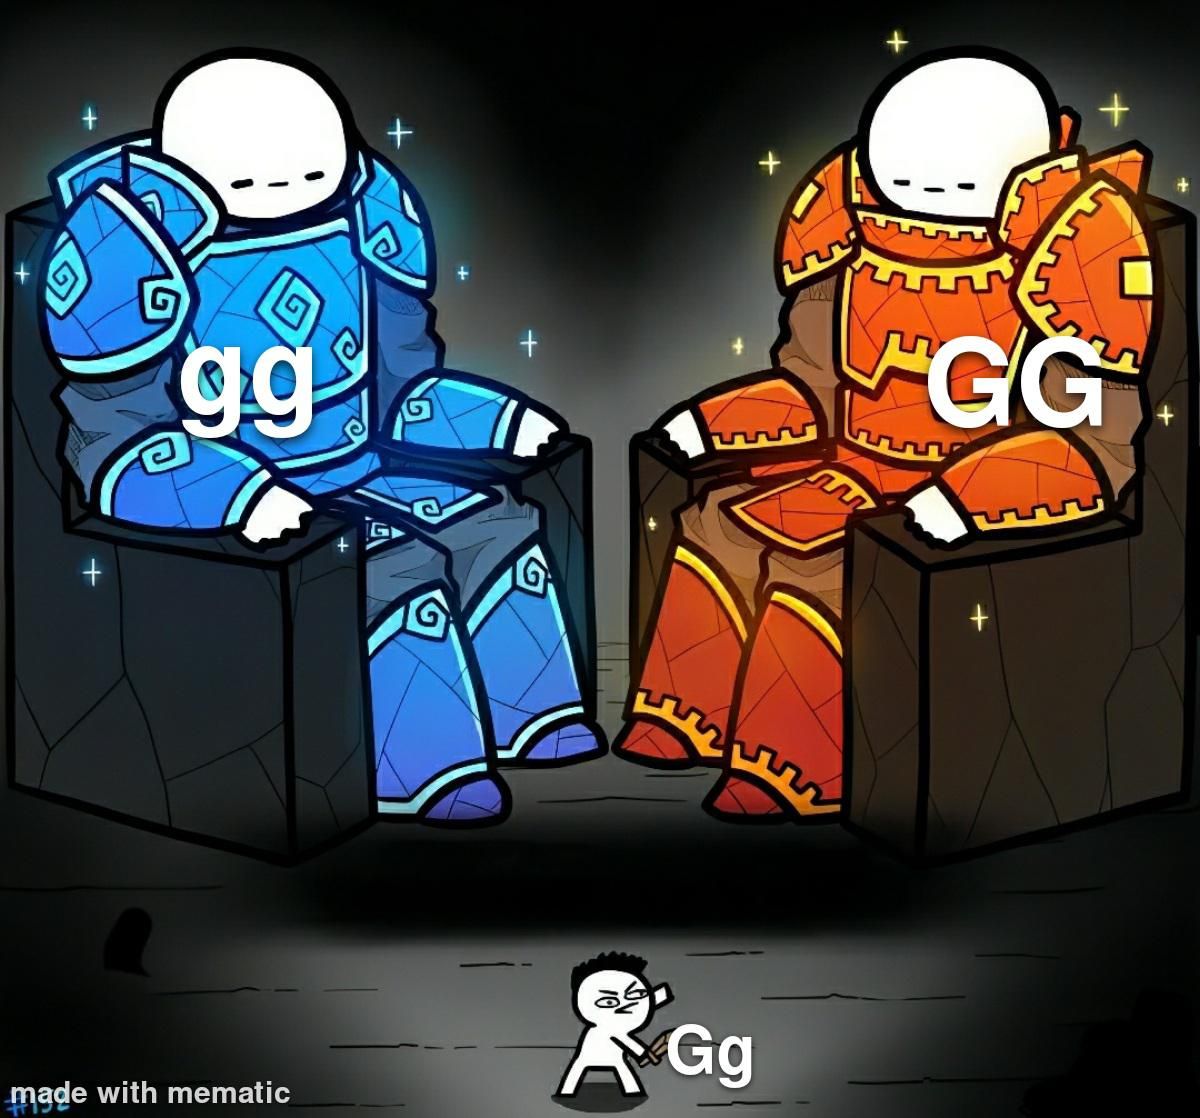 gg is the best tho